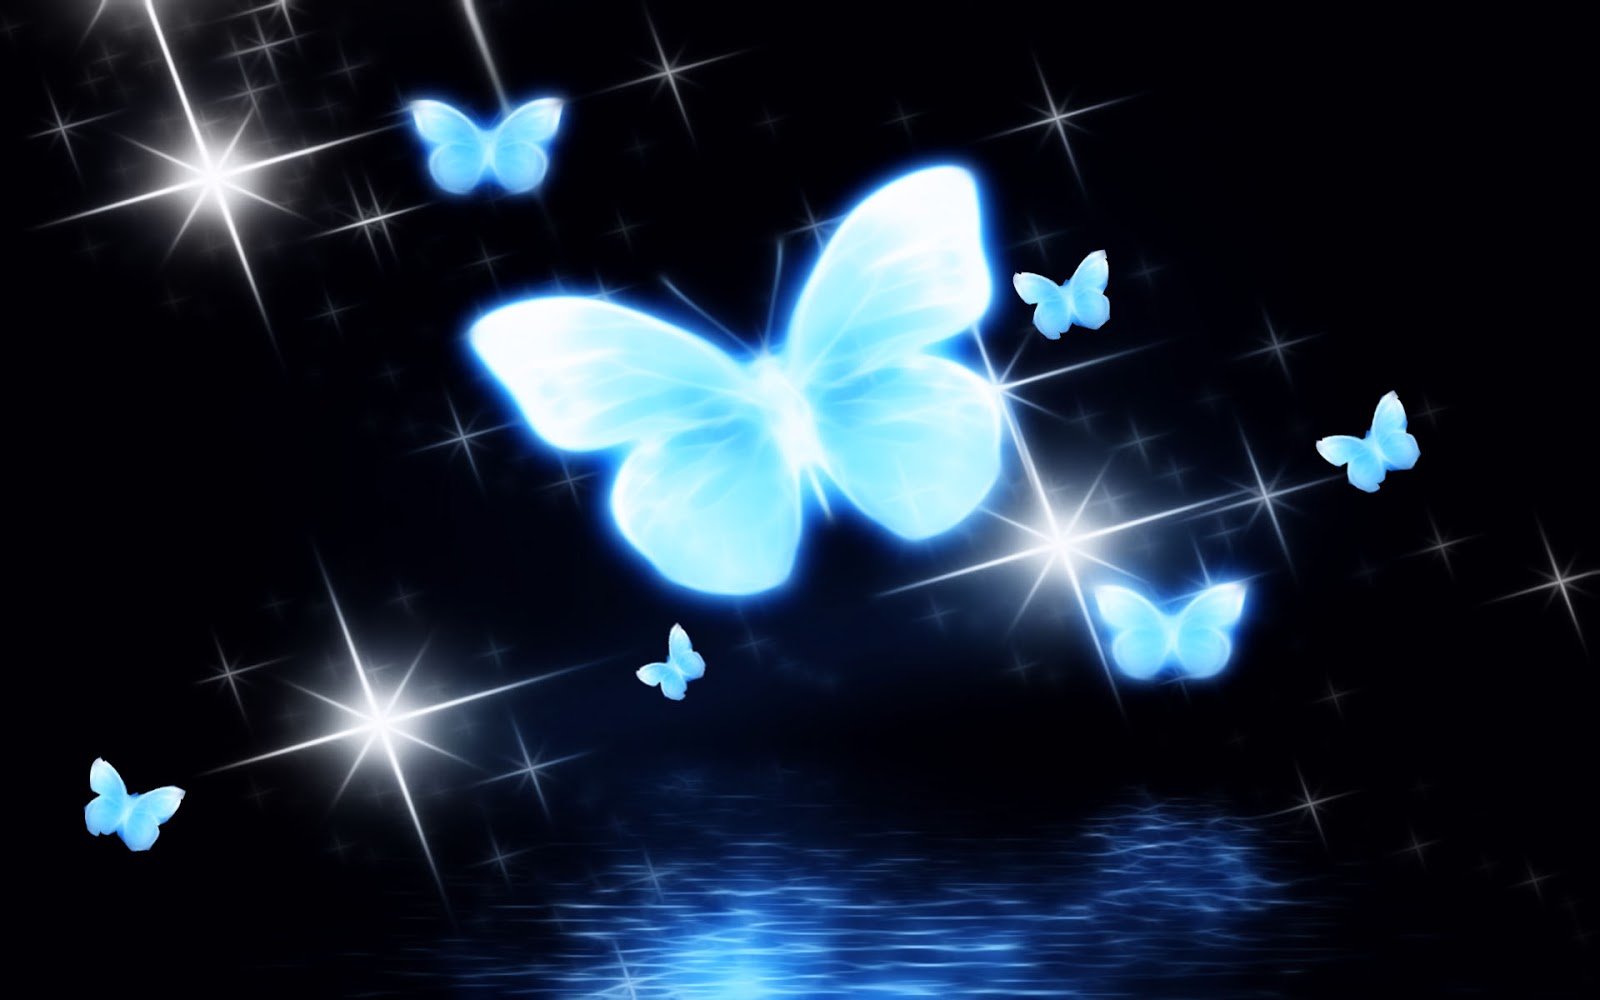 animated butterfly live wallpaper